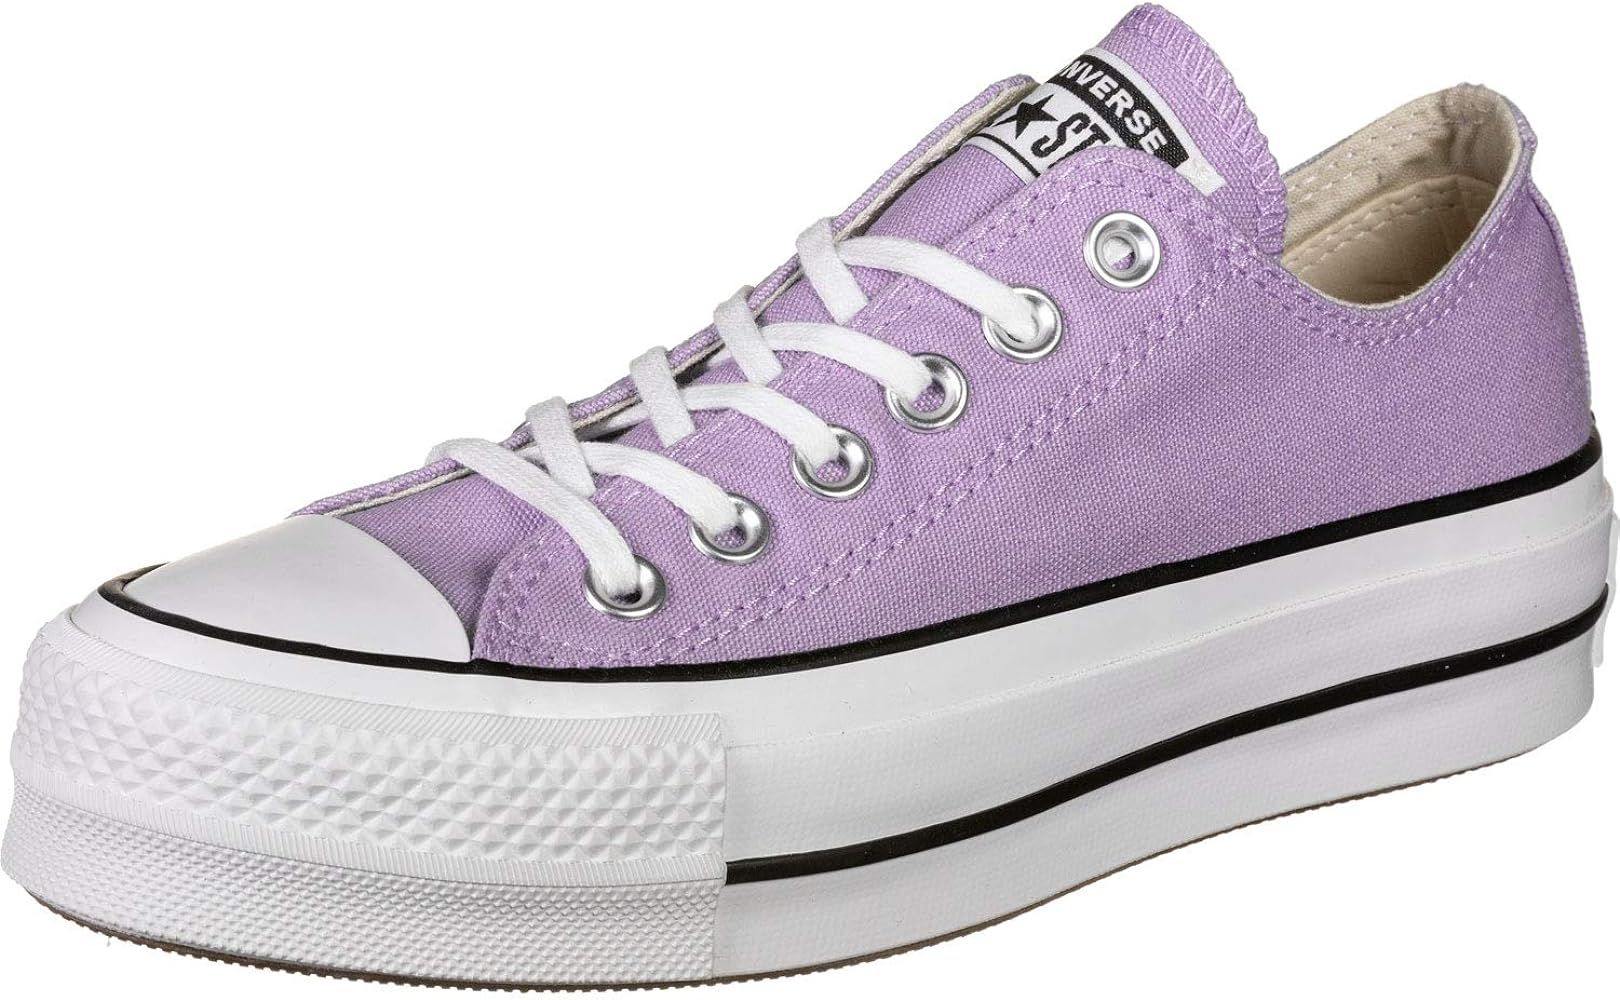 Converse Chuck Taylor Lift Womens Shoes Size 8.5, Color: Washed Lilac/Black/White | Amazon (US)